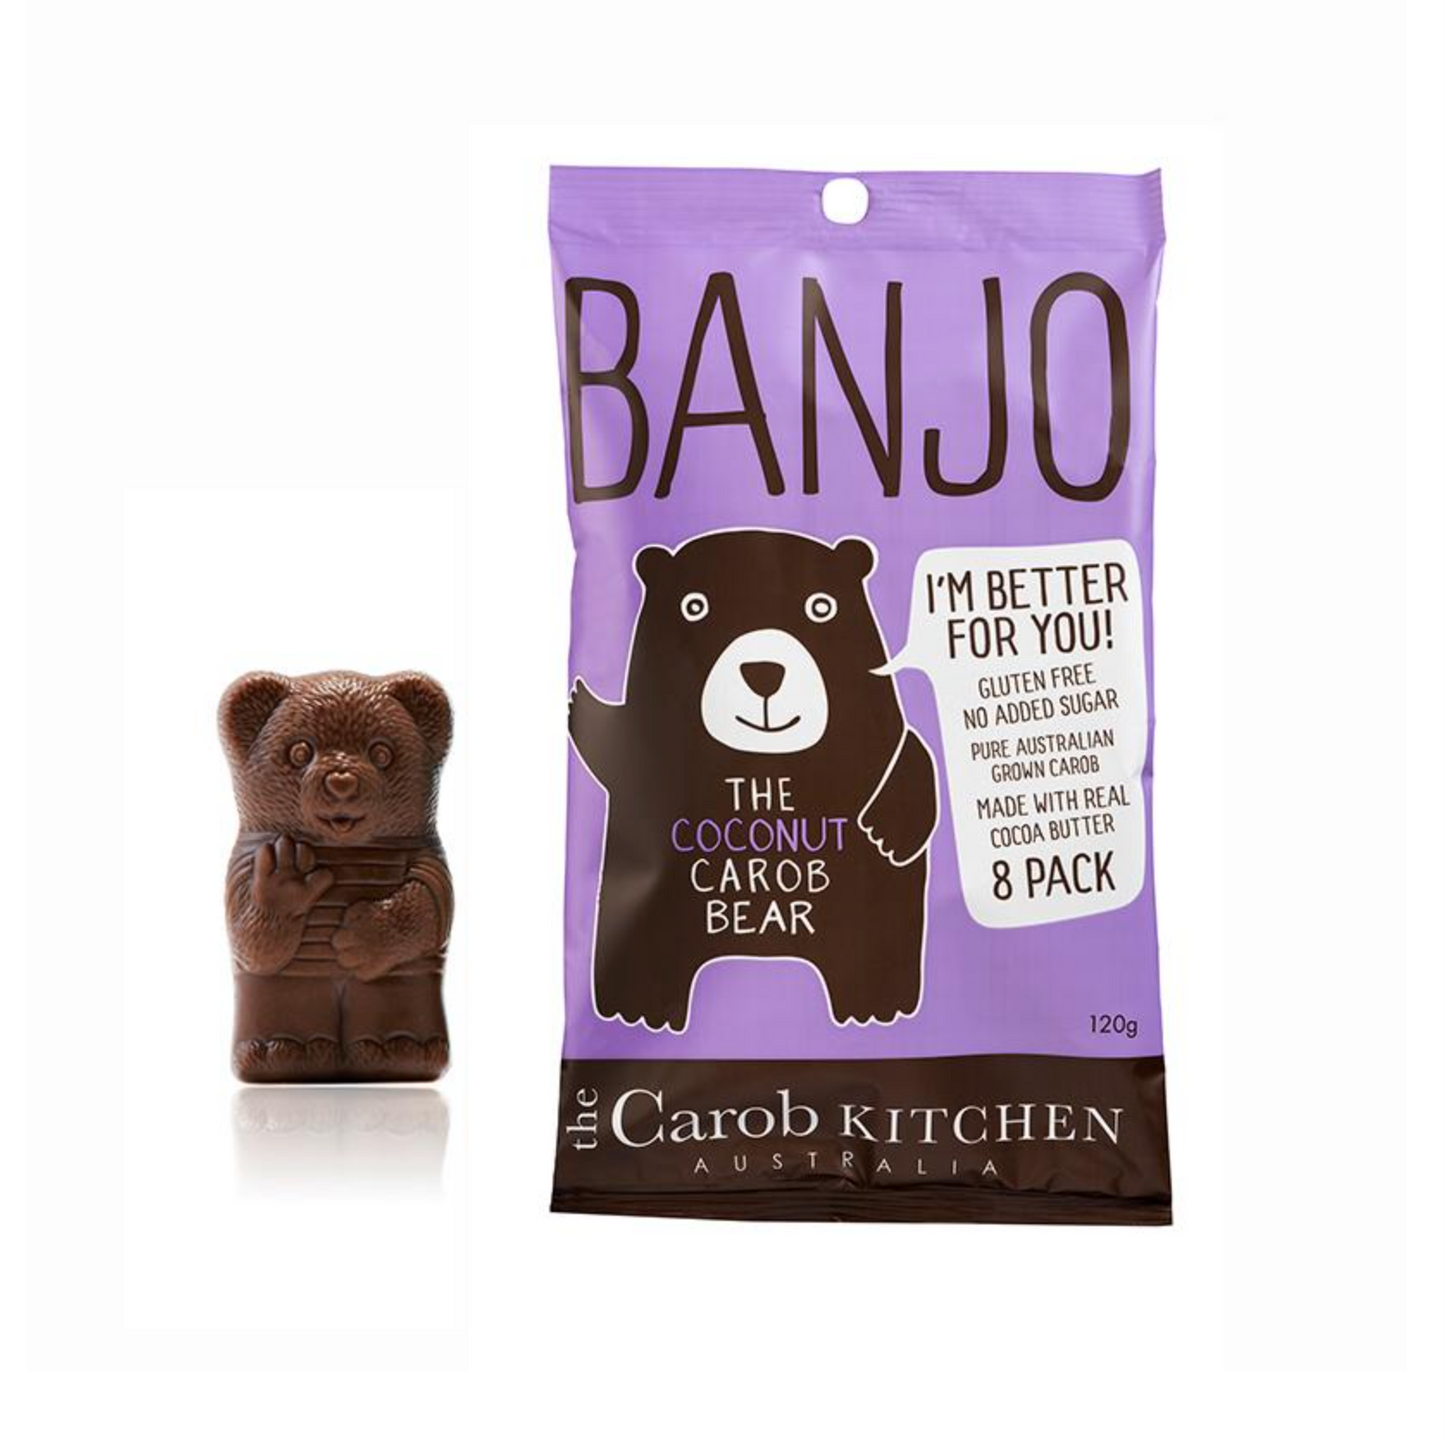 The Carob Kitchen Banjo Bear 15g Or 8 Pack, Coconut Flavour